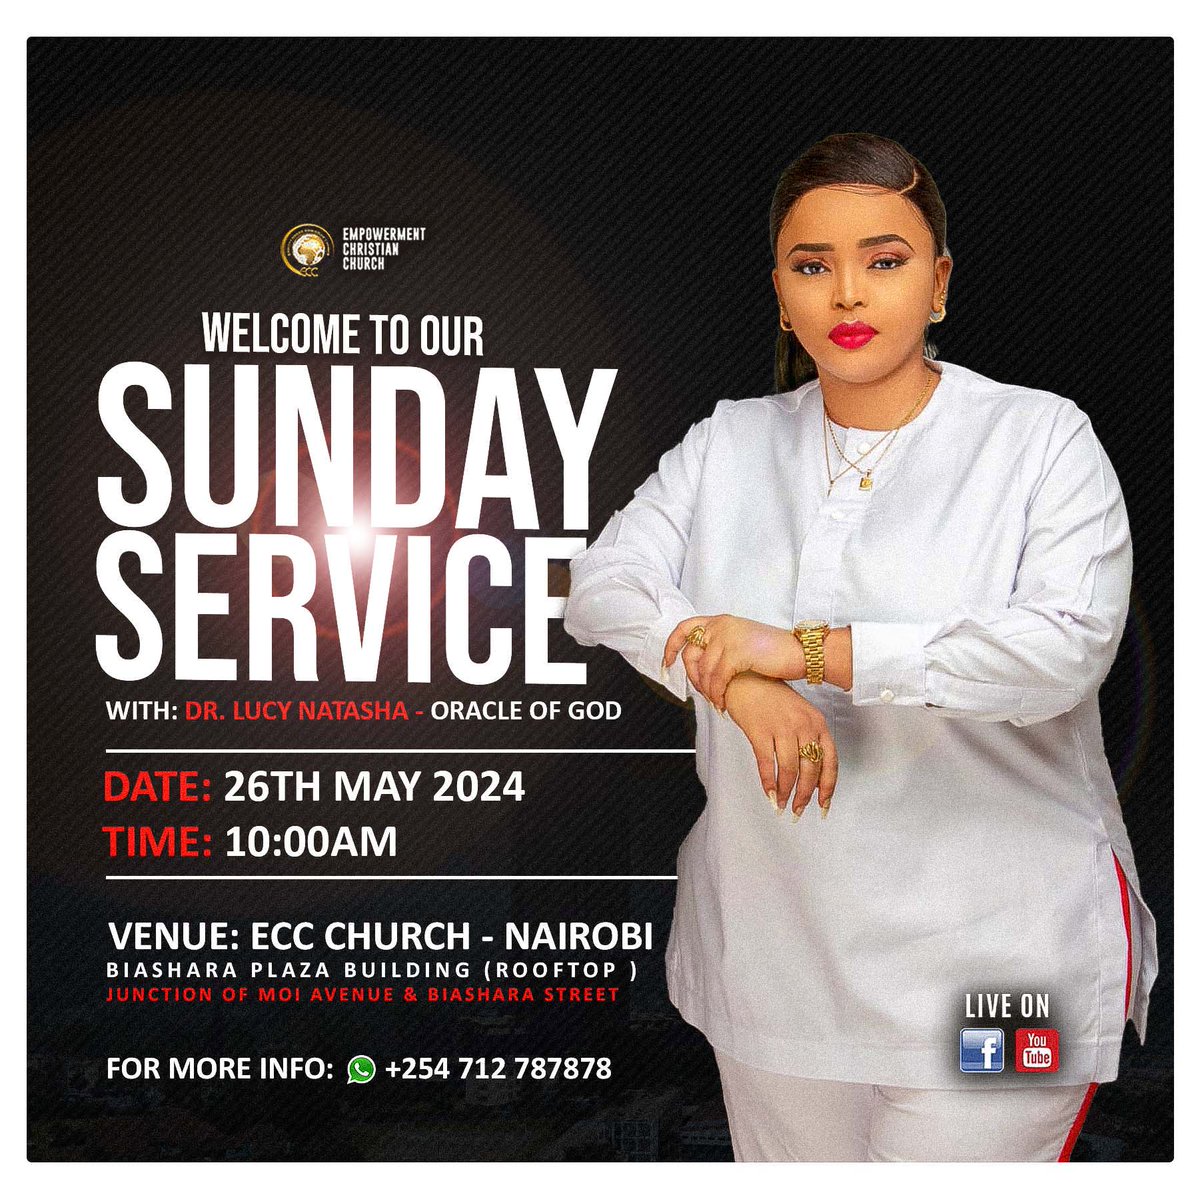 Hell can’t stop all Heaven started in your life! Philippians 1:6🔥🔥🔥 Welcome For Our Sunday Service @eccnairobi 10.00am LOCATED 📍 BIASHARA PLAZA BUILDING ROOFTOP AT THE JUNCTION OF MOI AVENUE AND BIASHARA STREET #SundayService